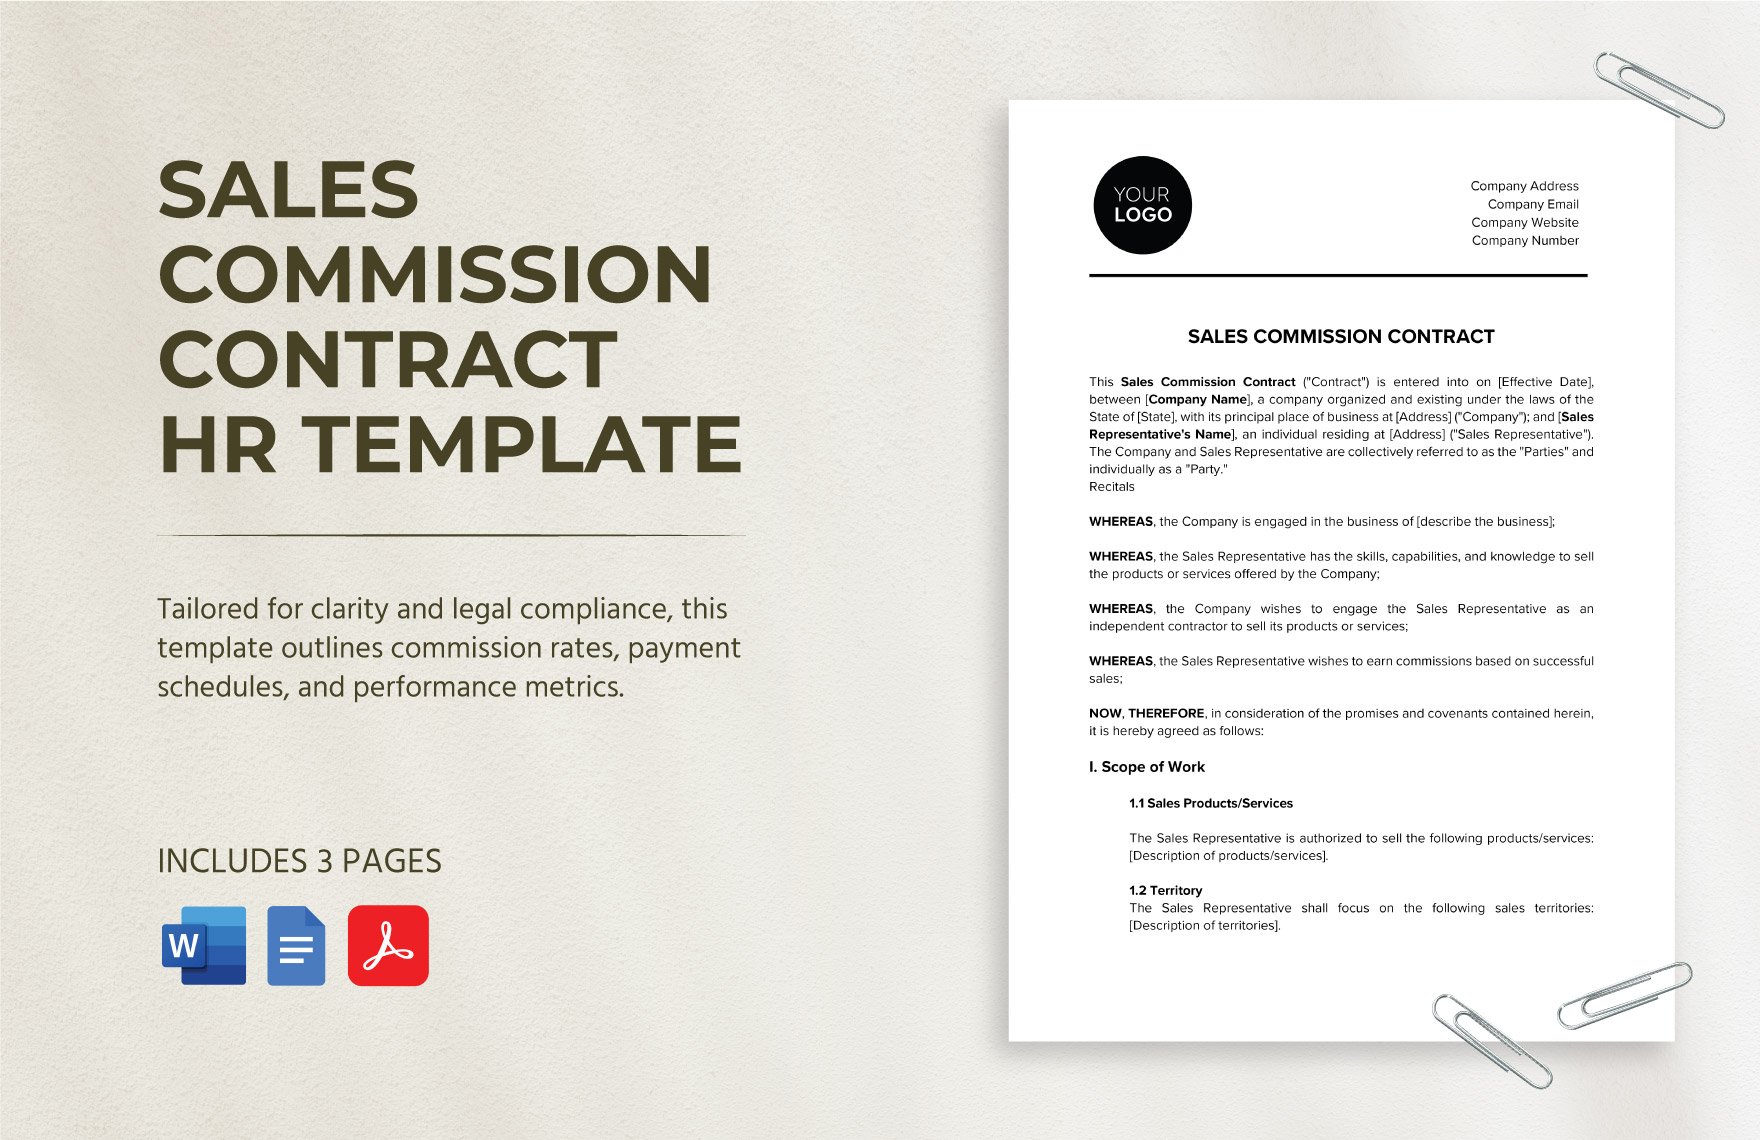 Sales Commission Contract HR Template